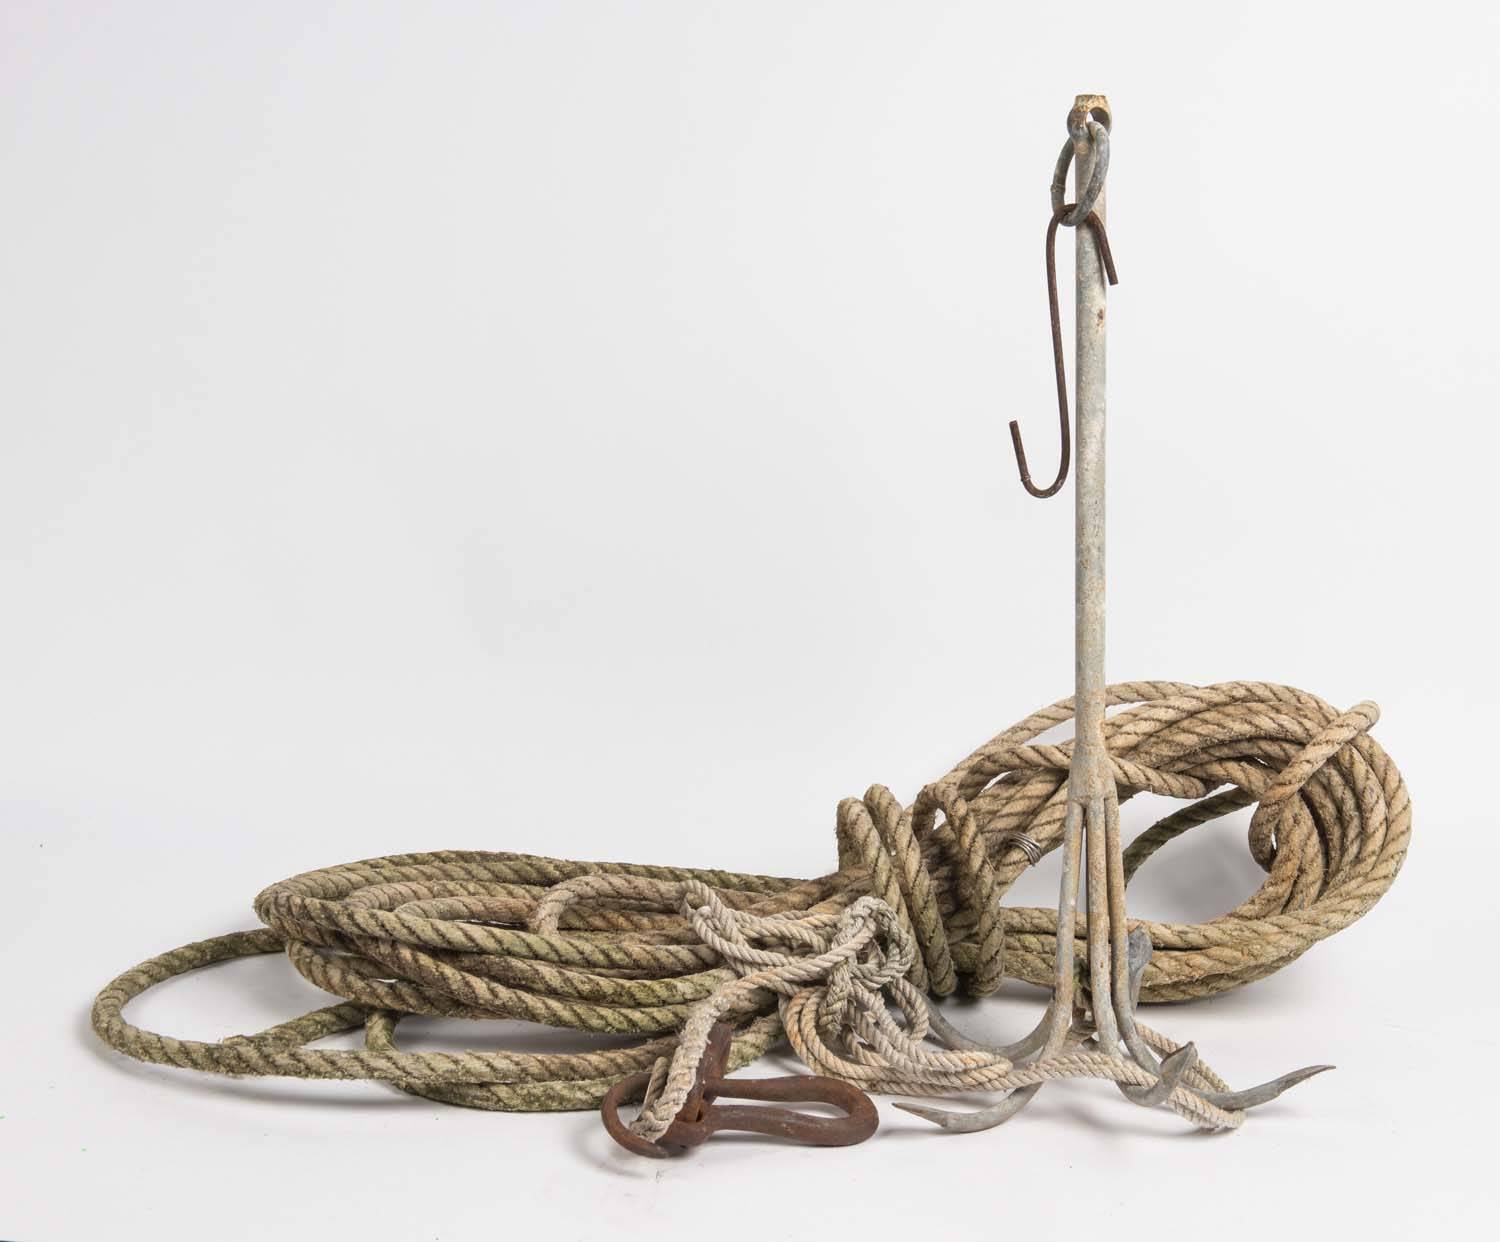 A boat anchor with old hemp rope and iron hook